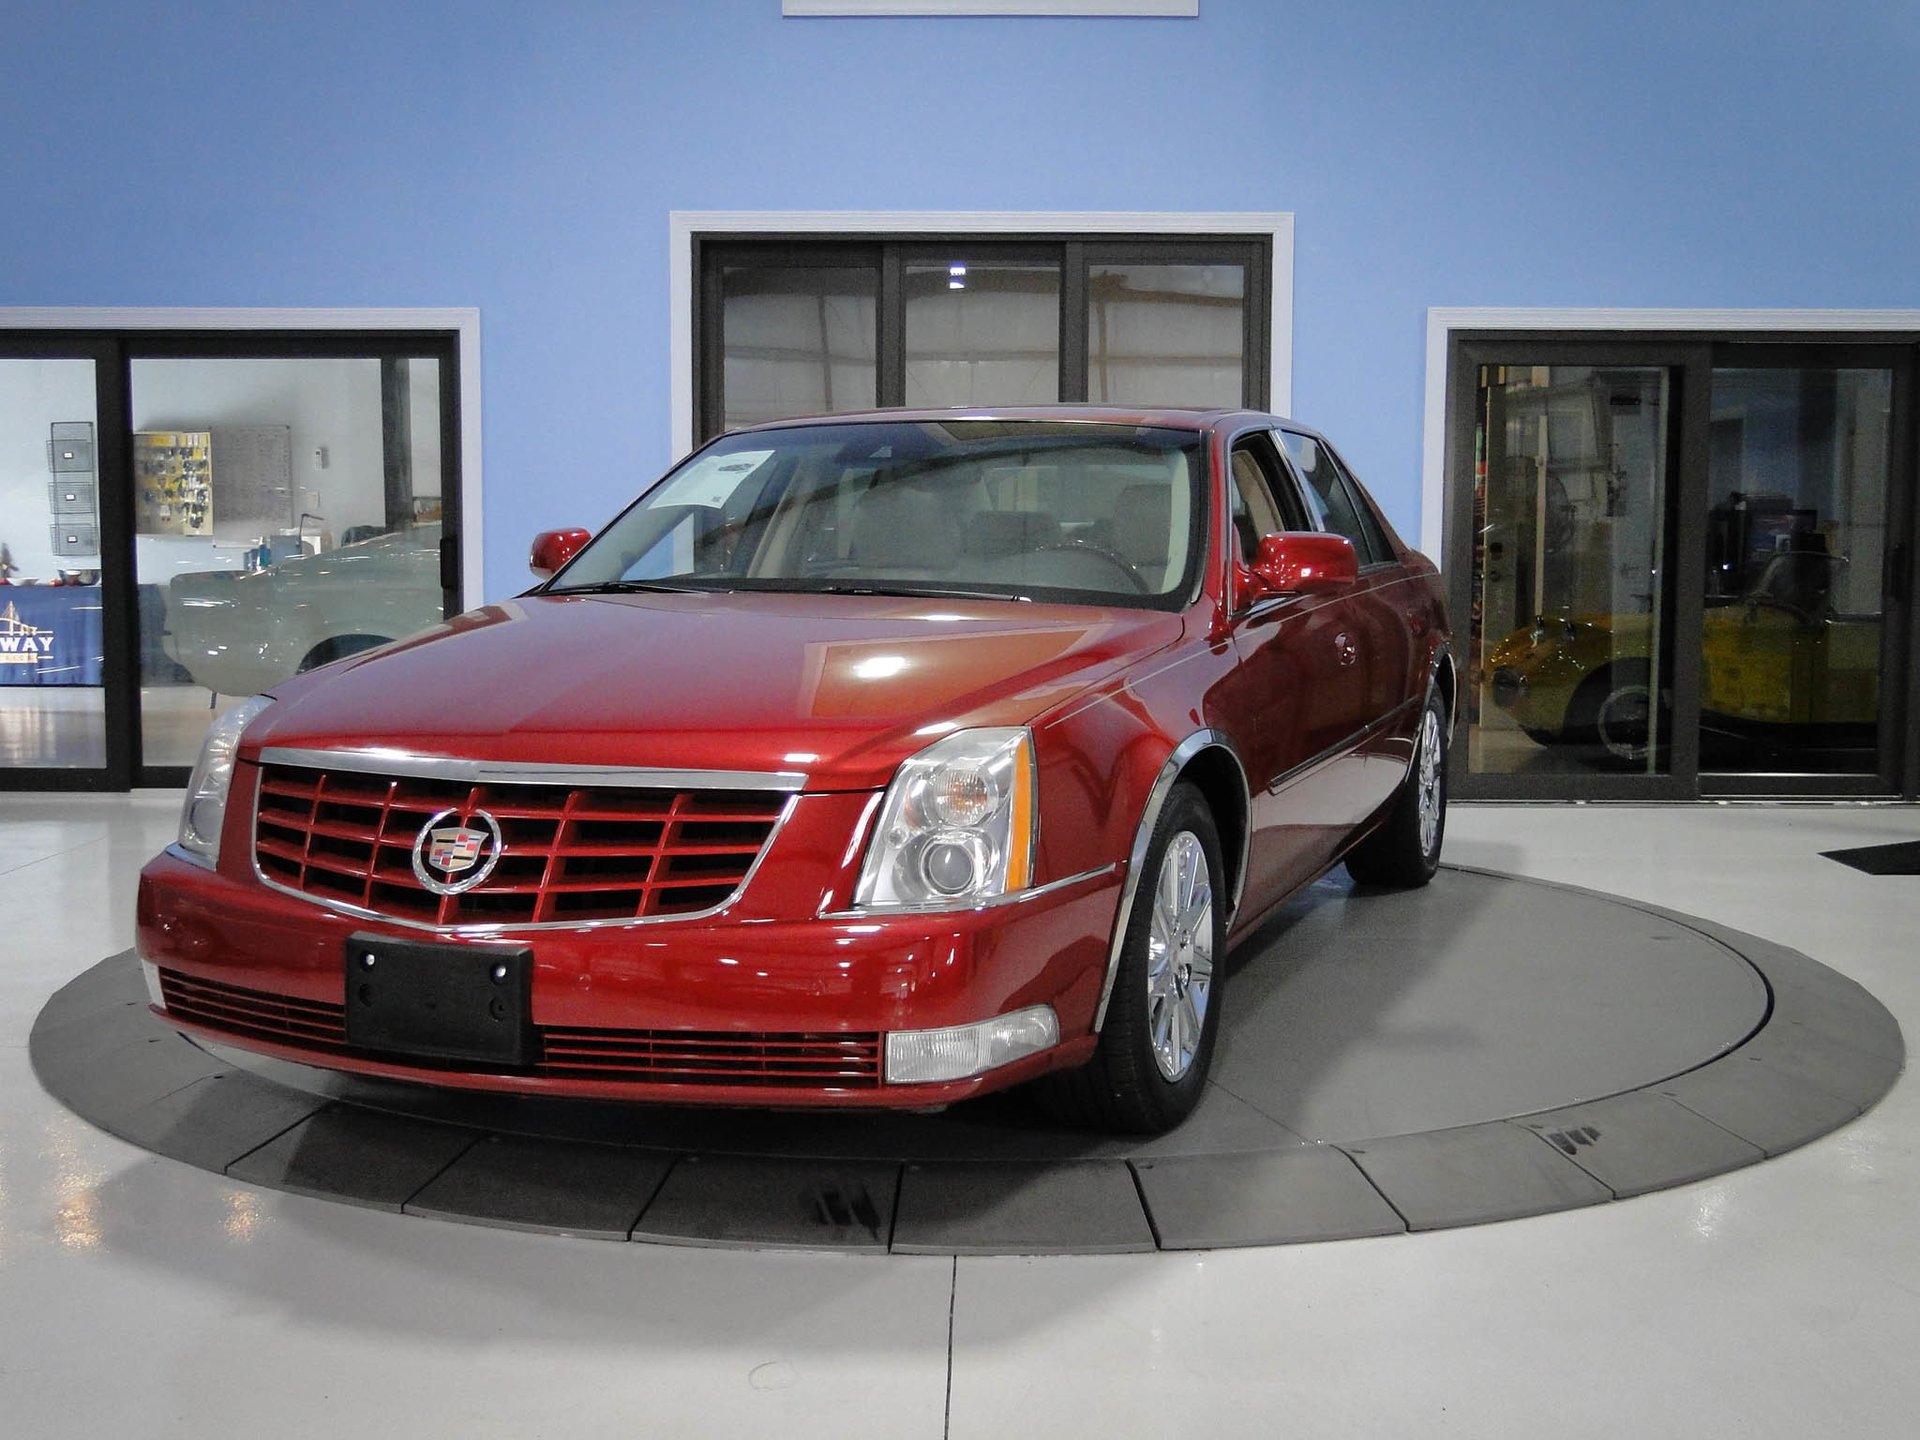 2011 Cadillac DTS | Classic Cars & Used Cars For Sale in Tampa, FL